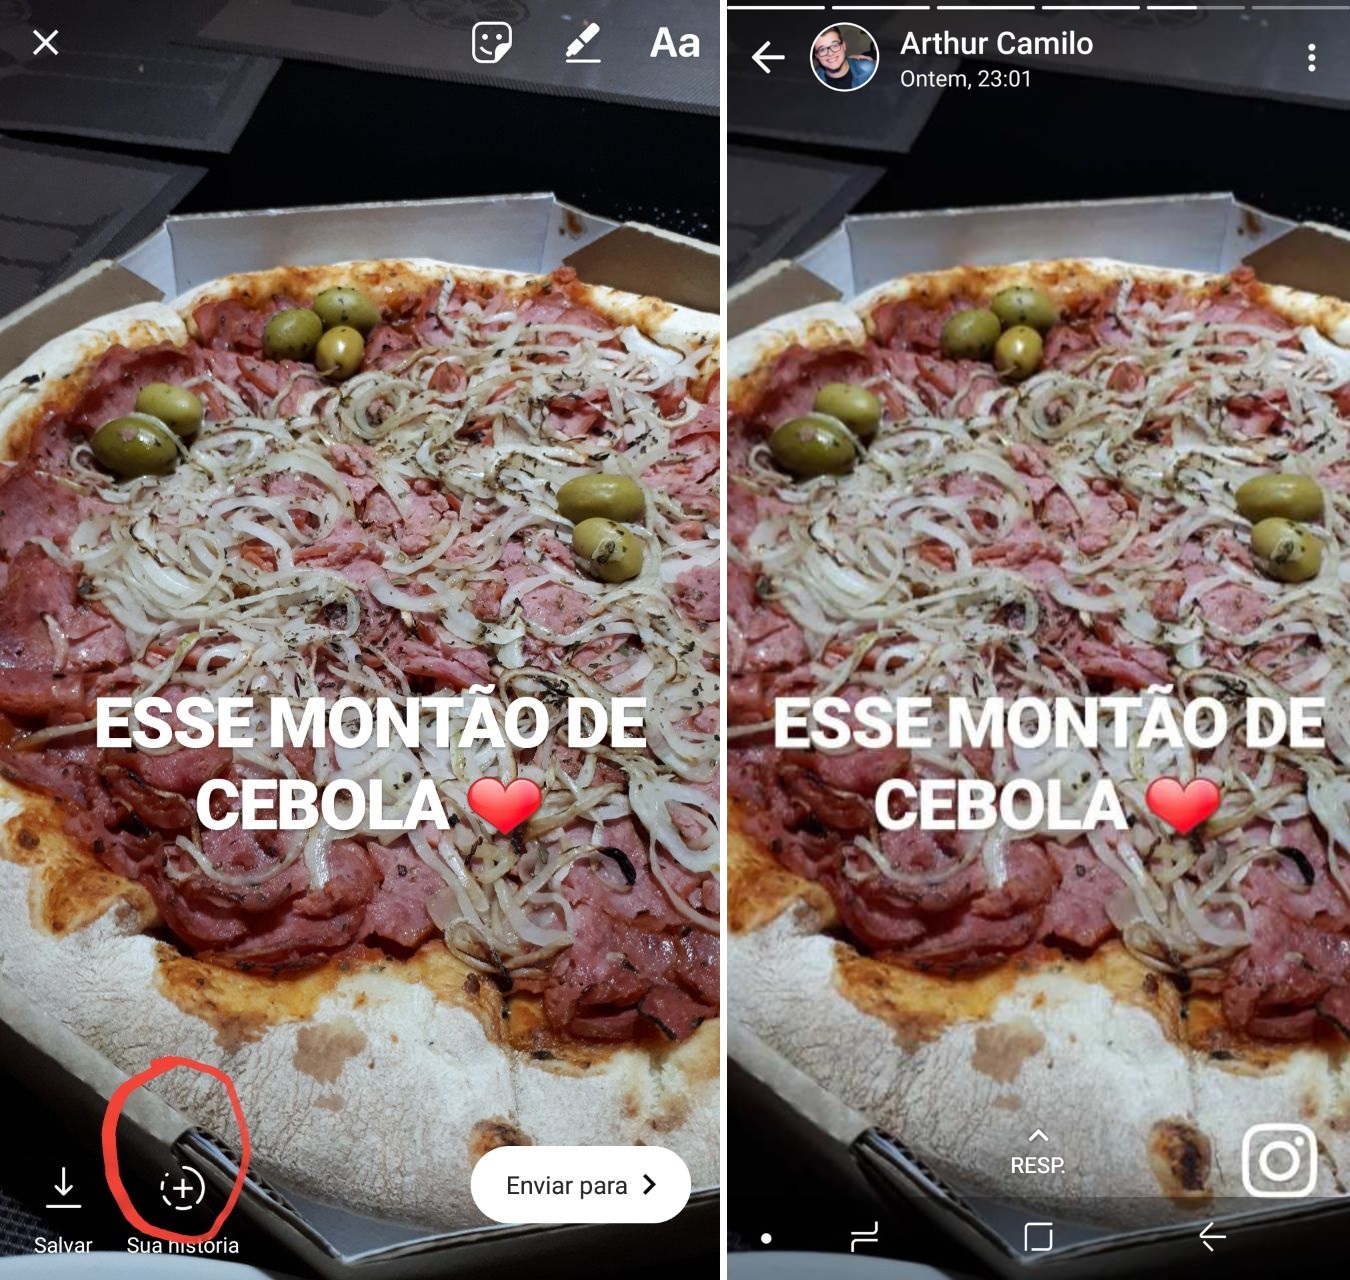 Instagram tests letting users post Stories directly to WhatsApp